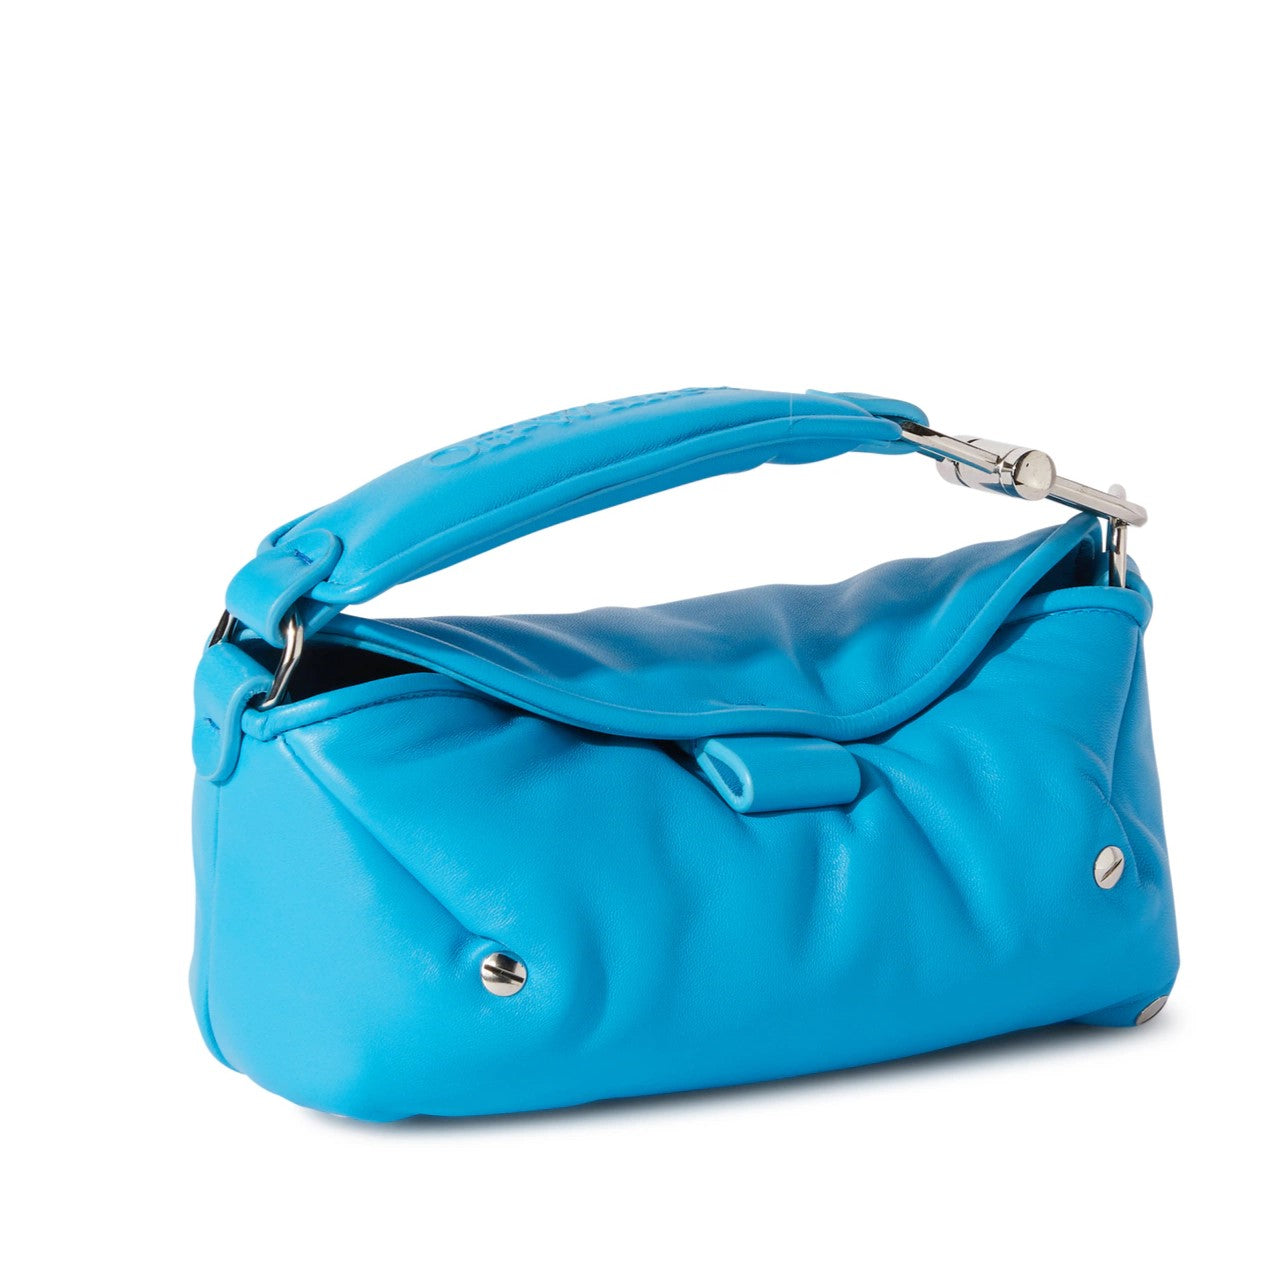 Copy of San Diego Small Top Handle in Blue Handbags OFF WHITE - LOLAMIR